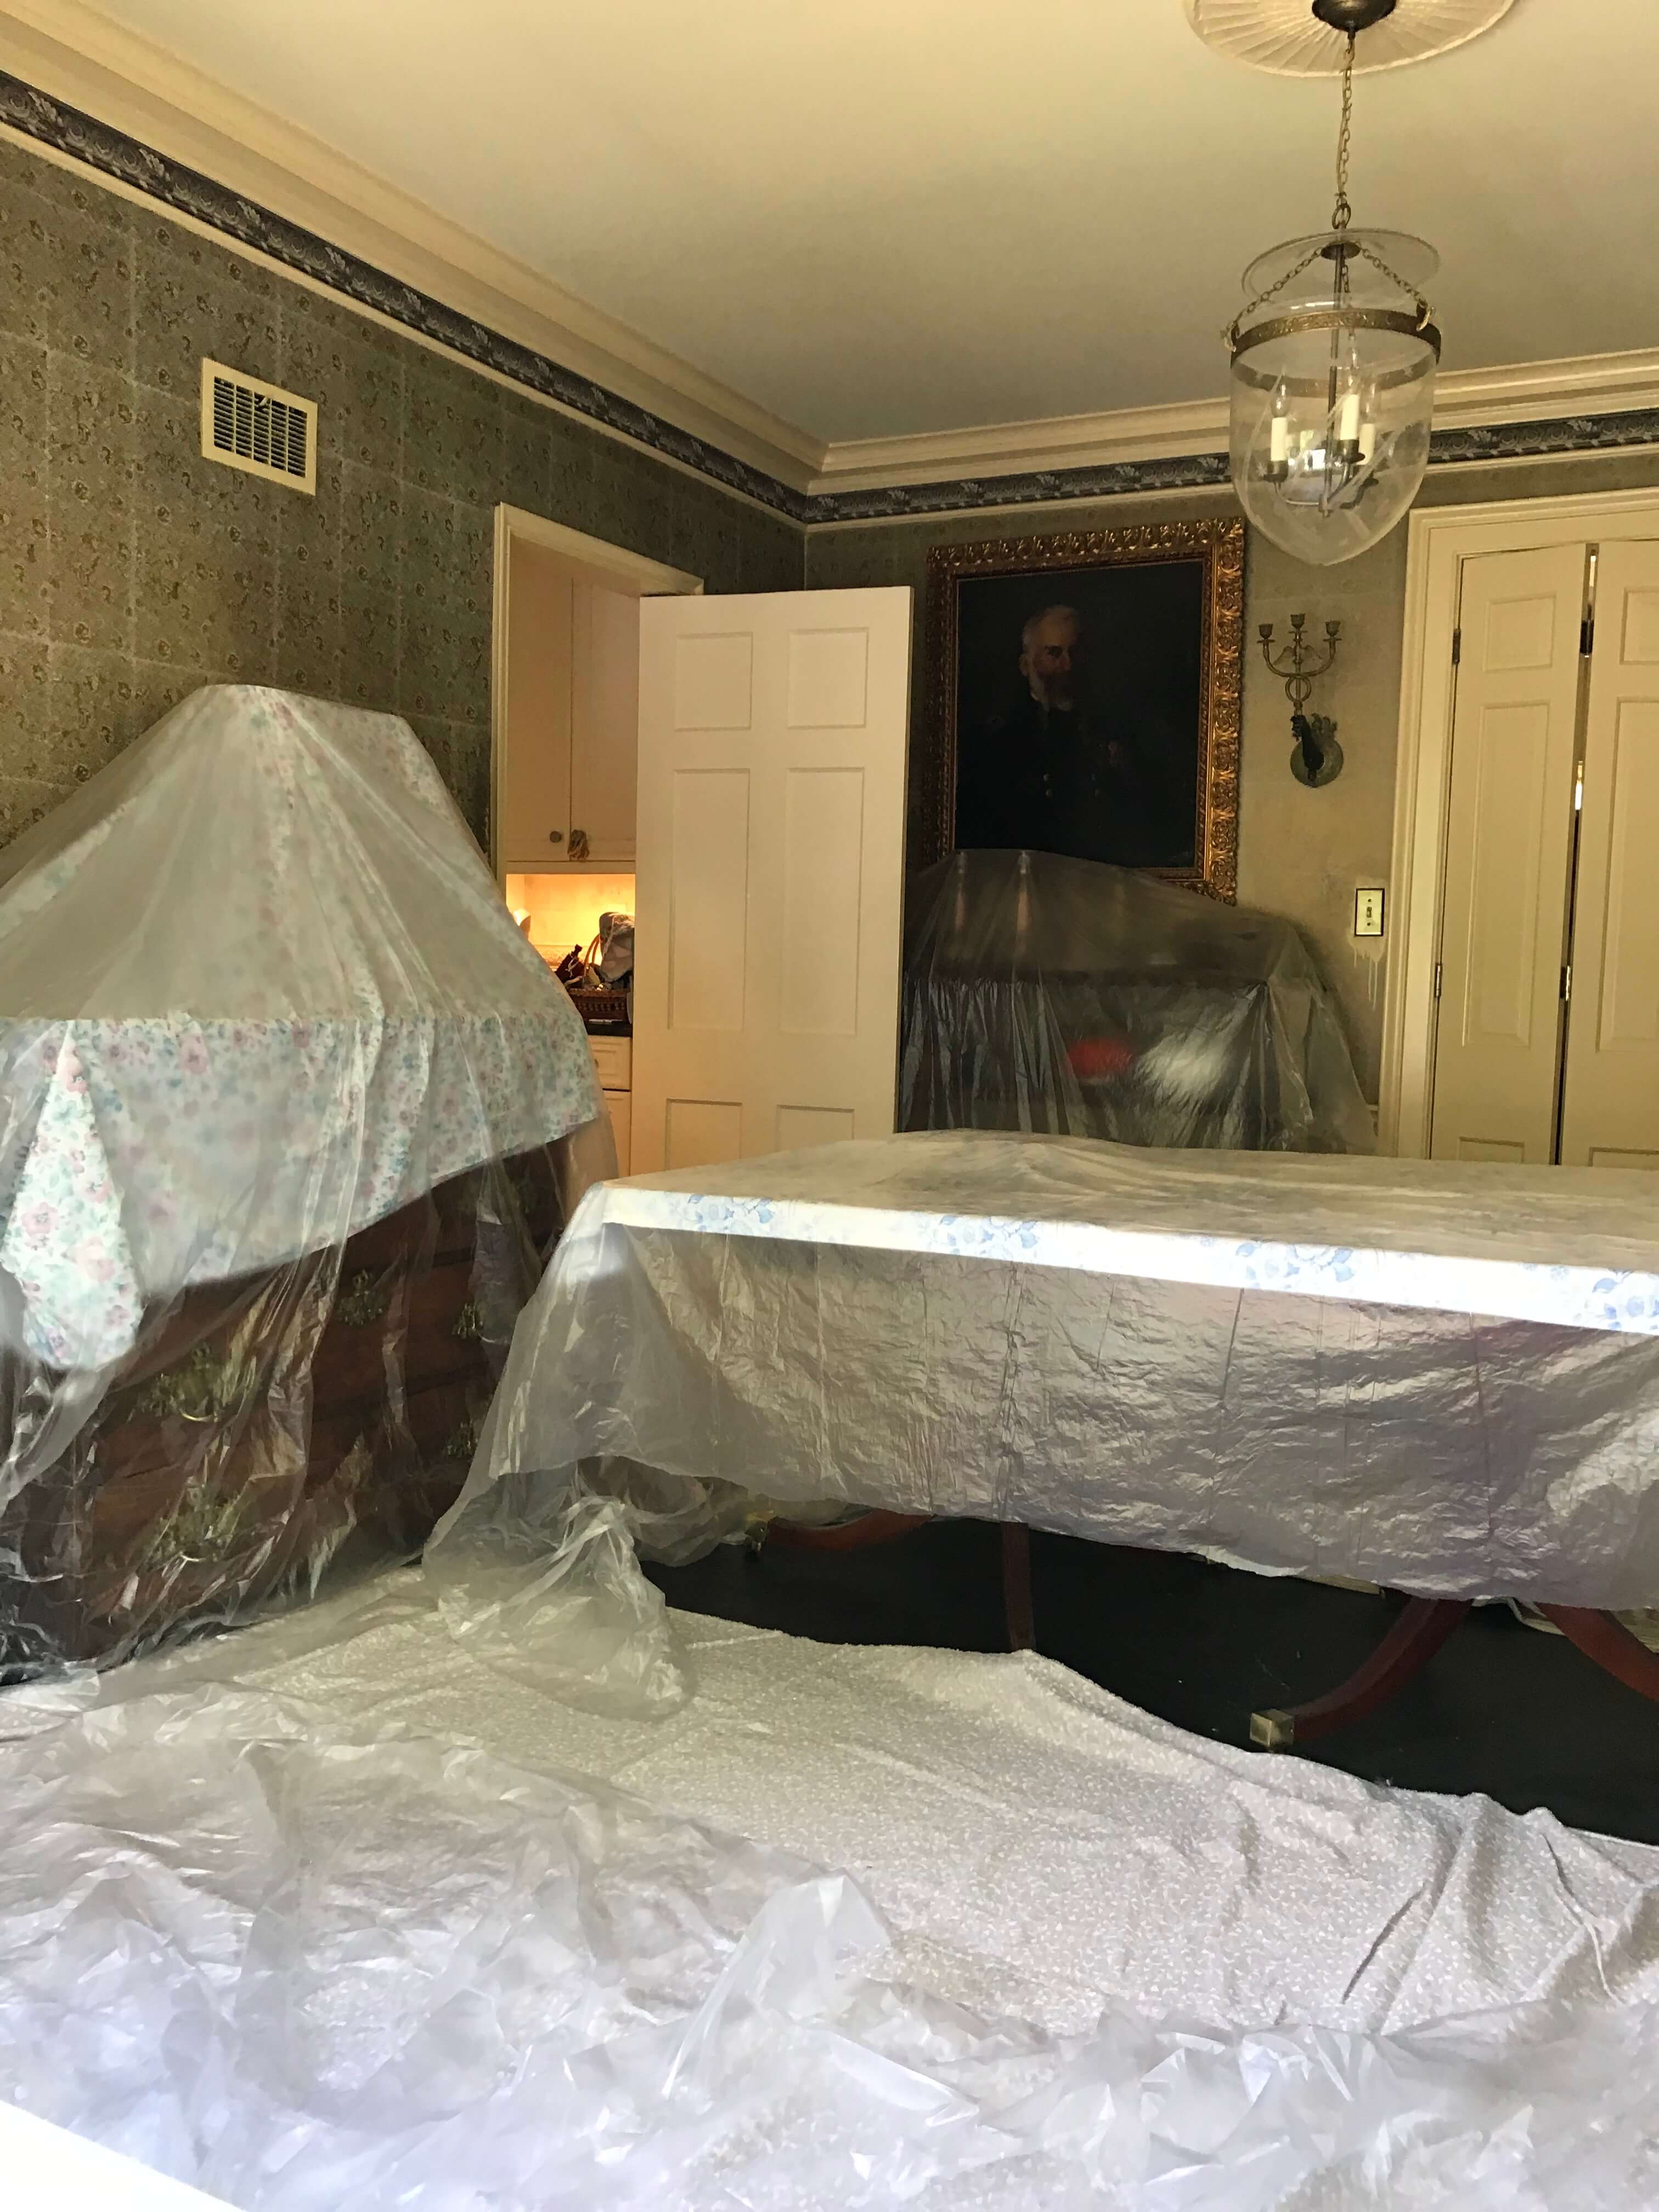 Covering all the furniture and floor with plastic sheeting